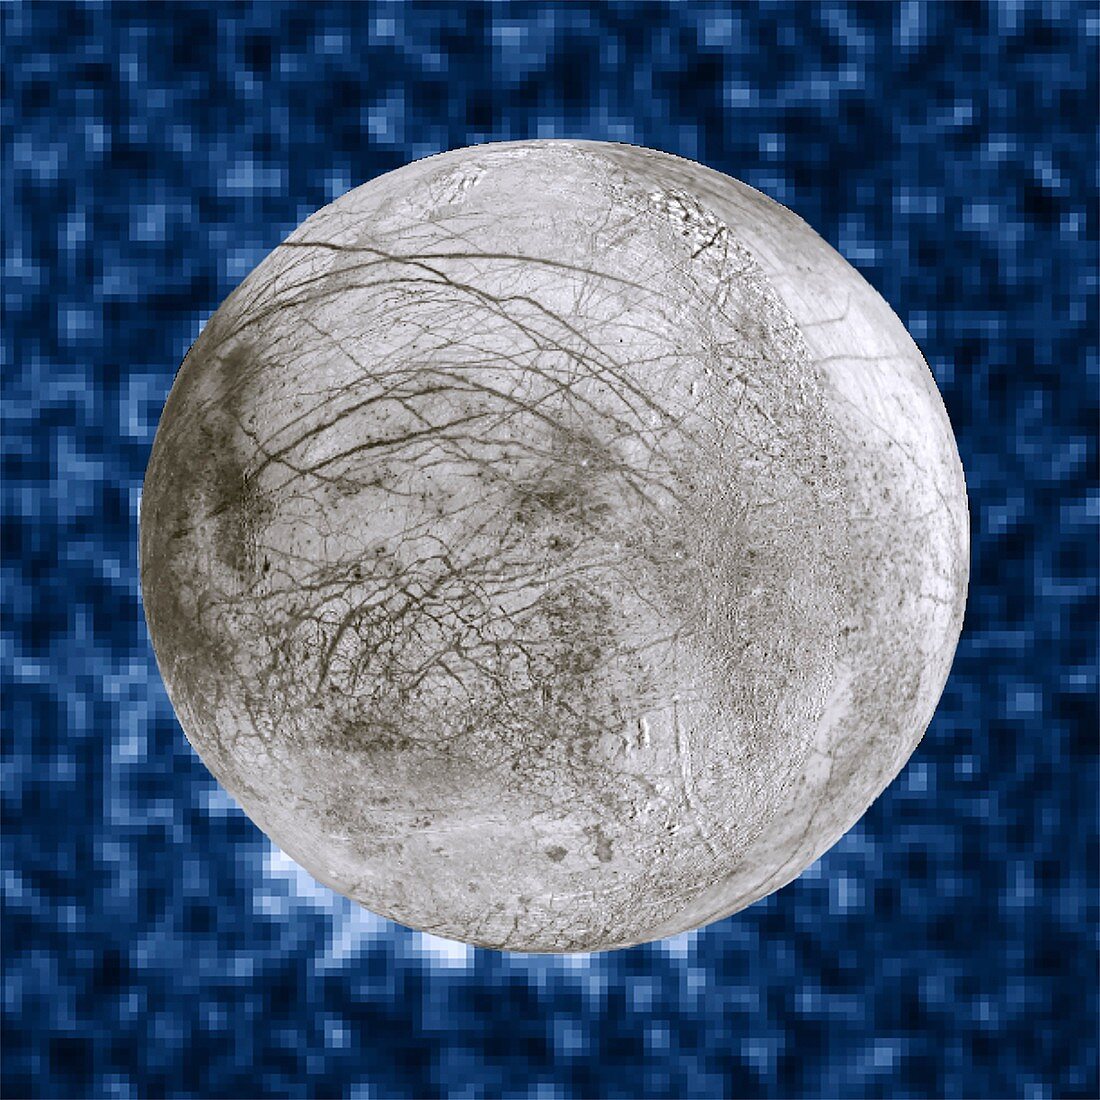 Water plumes erupting from Europa